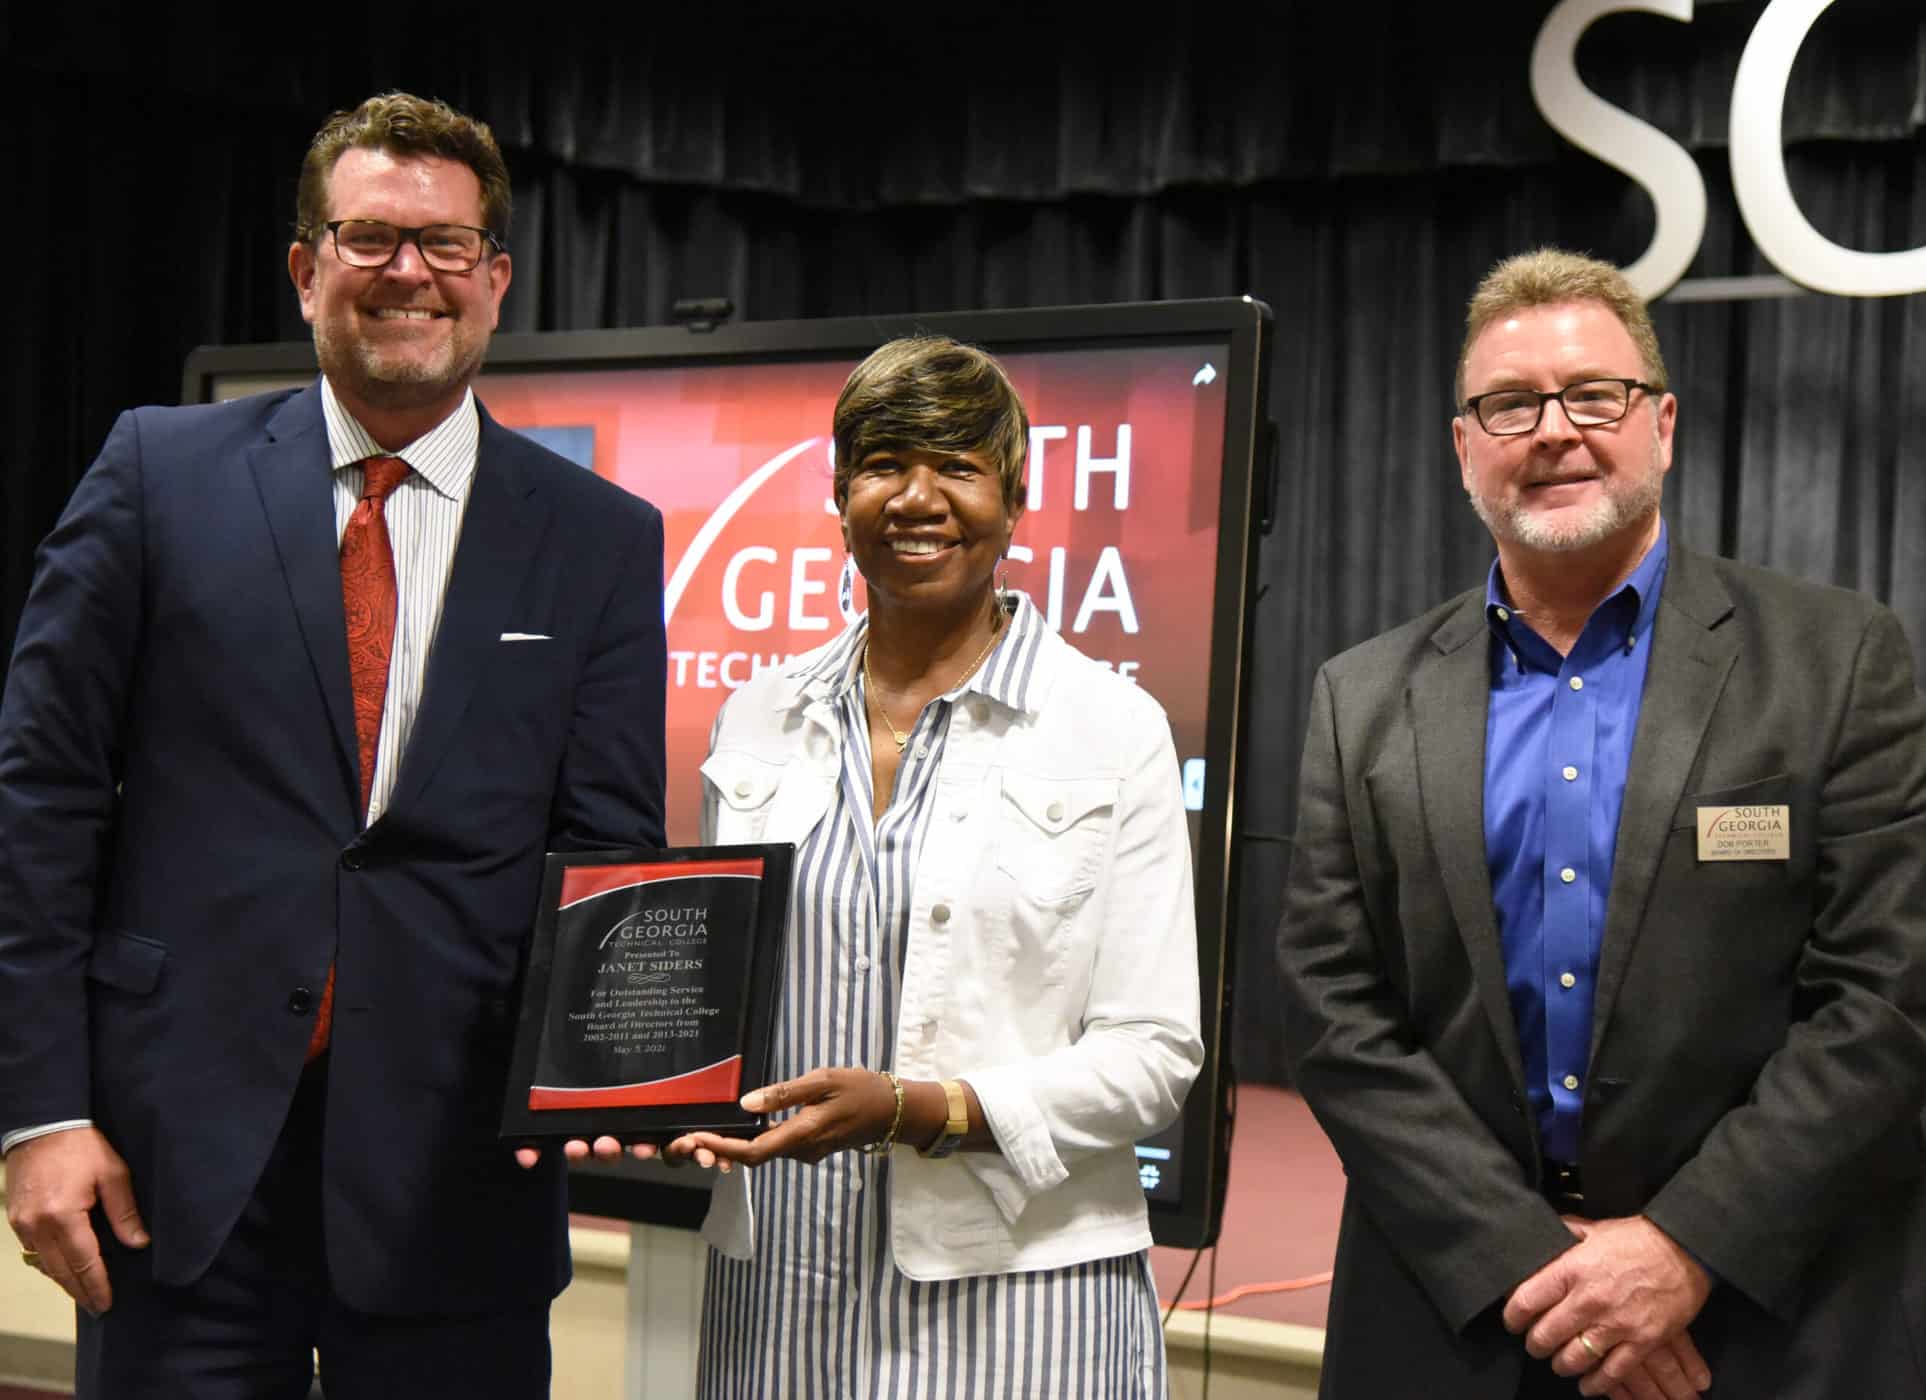 SGTC President Dr. John Watford (left) is shown above presenting outgoing SGTC Board of Directors Vice-Chair Janet Siders (center) with a plaque of appreciation for her service to the Board. SGTC Chairman Don Porter is also shown congratulating Siders.